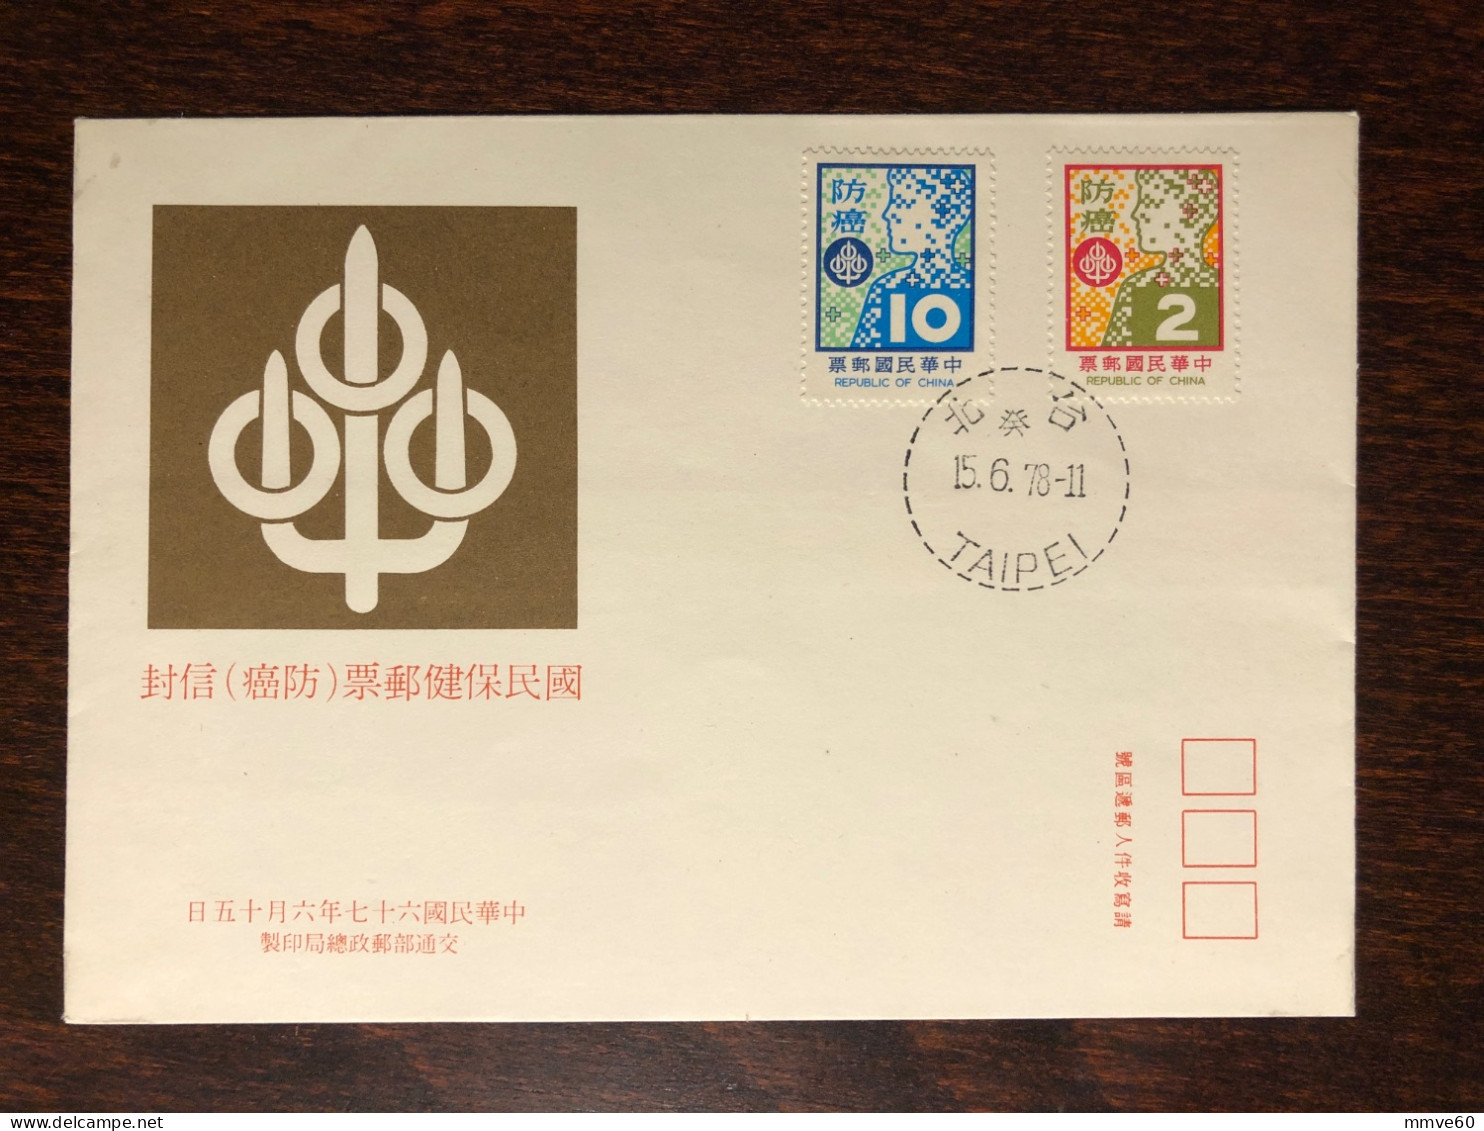 TAIWAN ROC FDC COVER 1978 YEAR CANCER ONCOLOGY HEALTH MEDICINE STAMPS - FDC